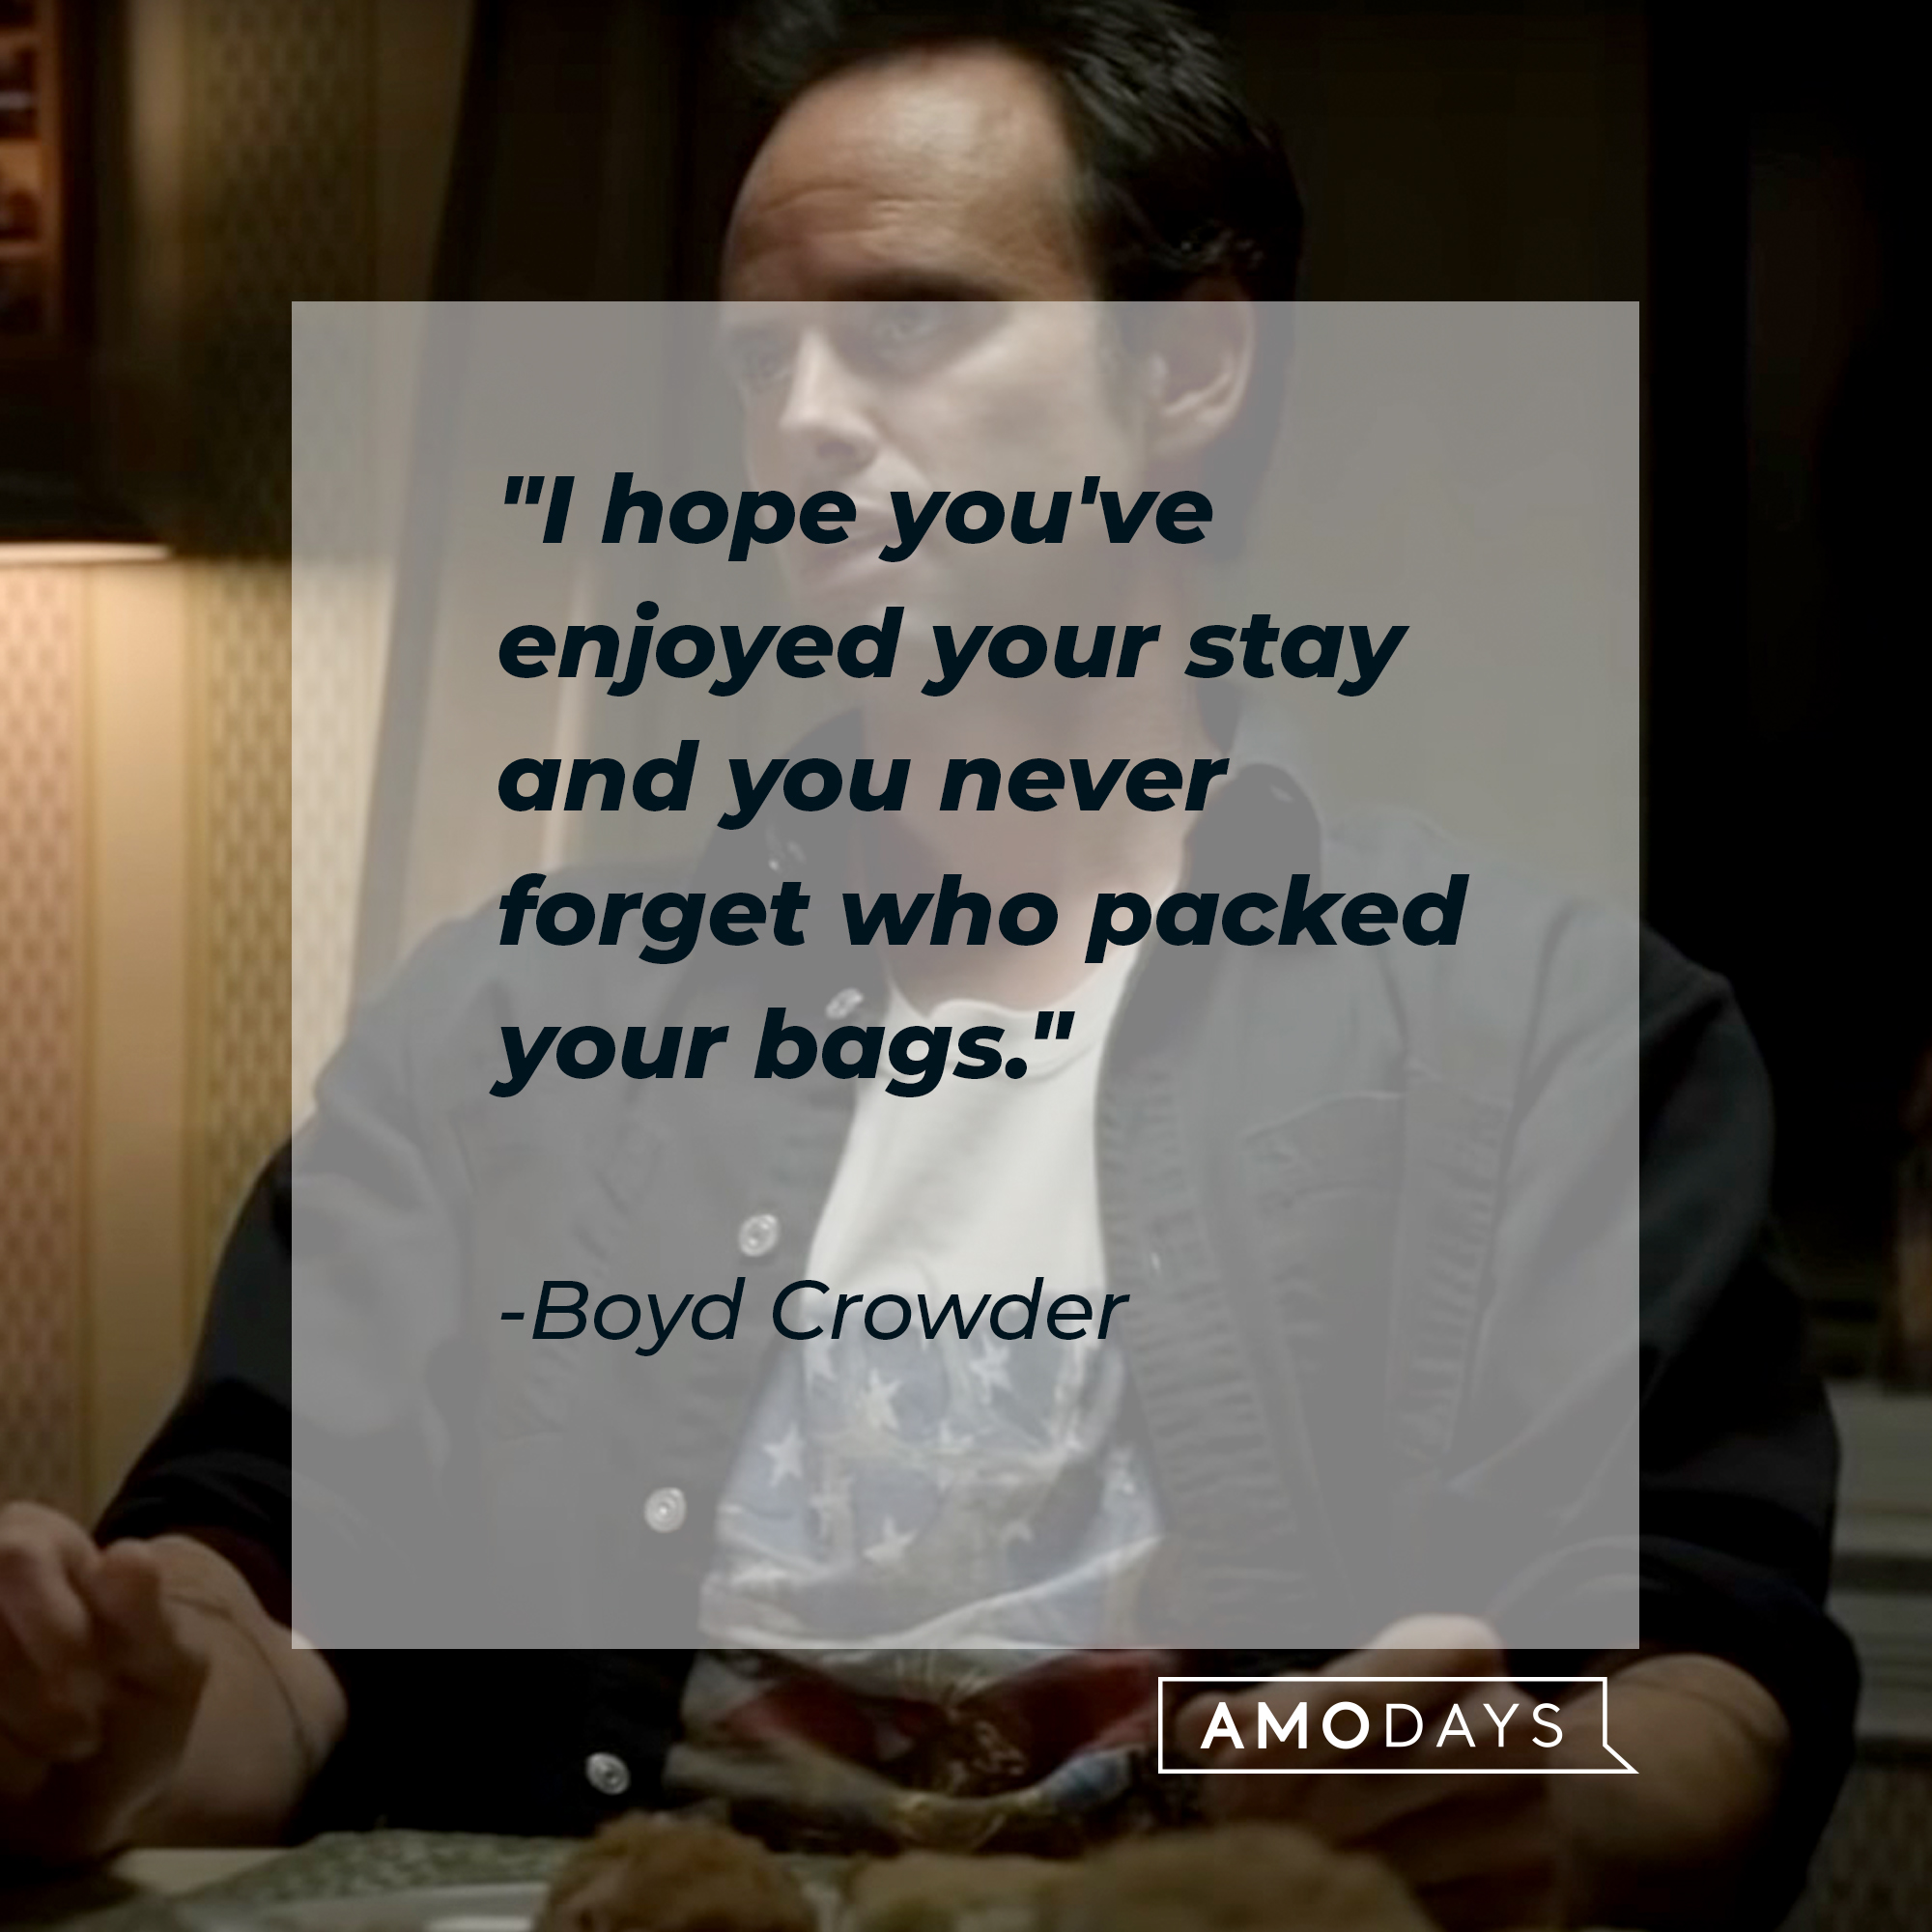 An image of  Boyd Crowder with his quote: "I hope you've enjoyed your stay and you never forget who packed your bags." | Source:  youtube.com/FXNetworks